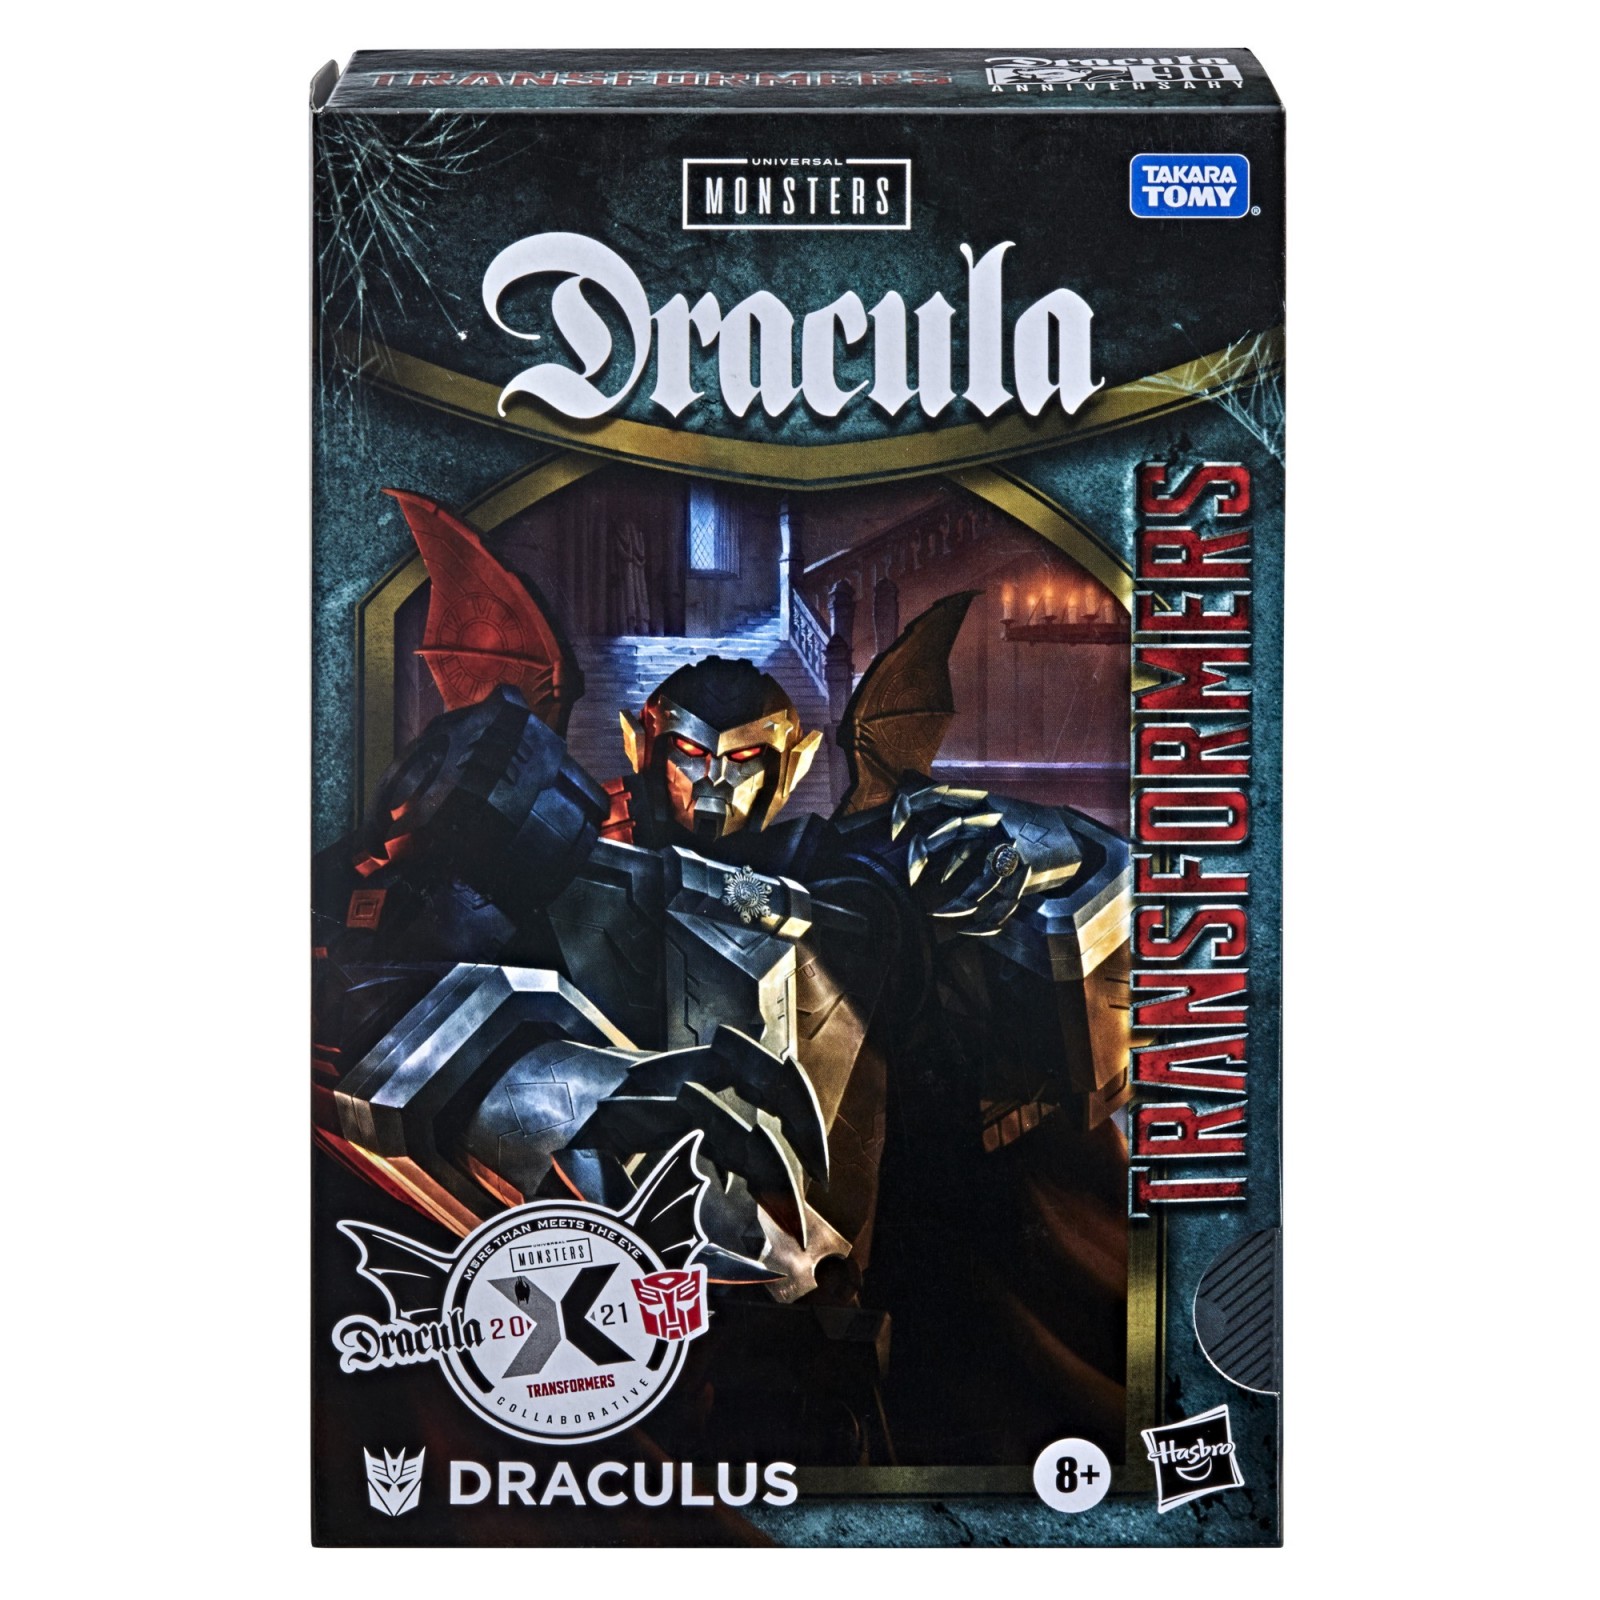 Transformers News: First Images of Dracula x Transformers crossover Draculus Figure